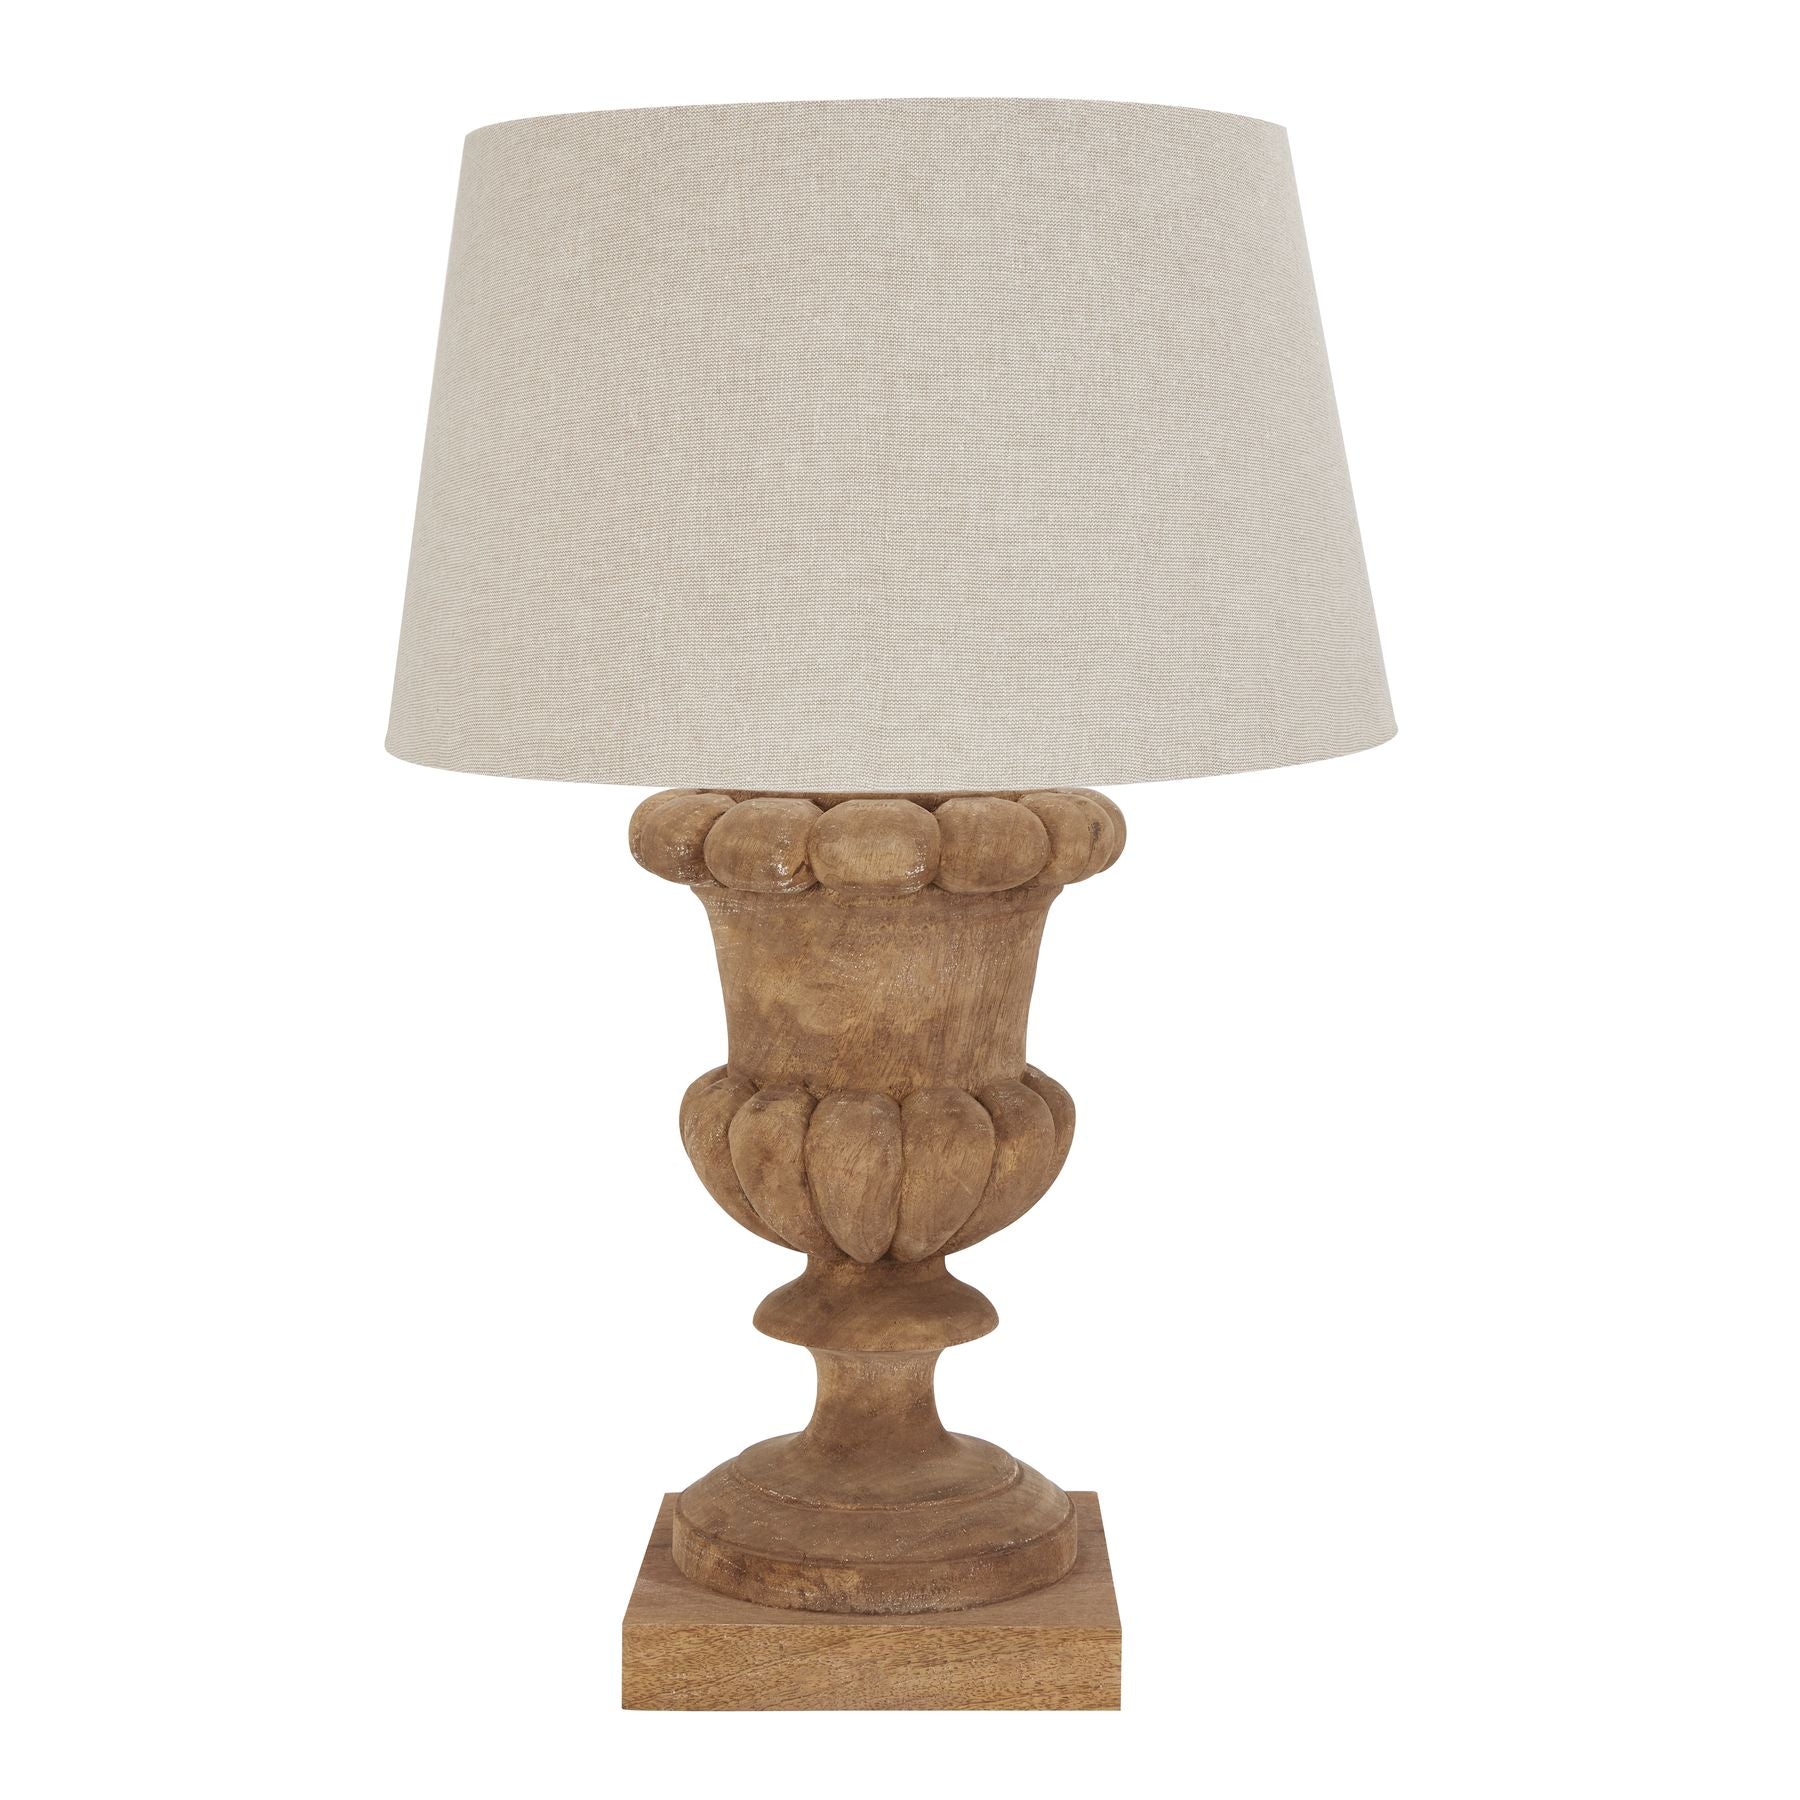 View Delaney Natural Wash Fluted Lamp With Linen Shade information